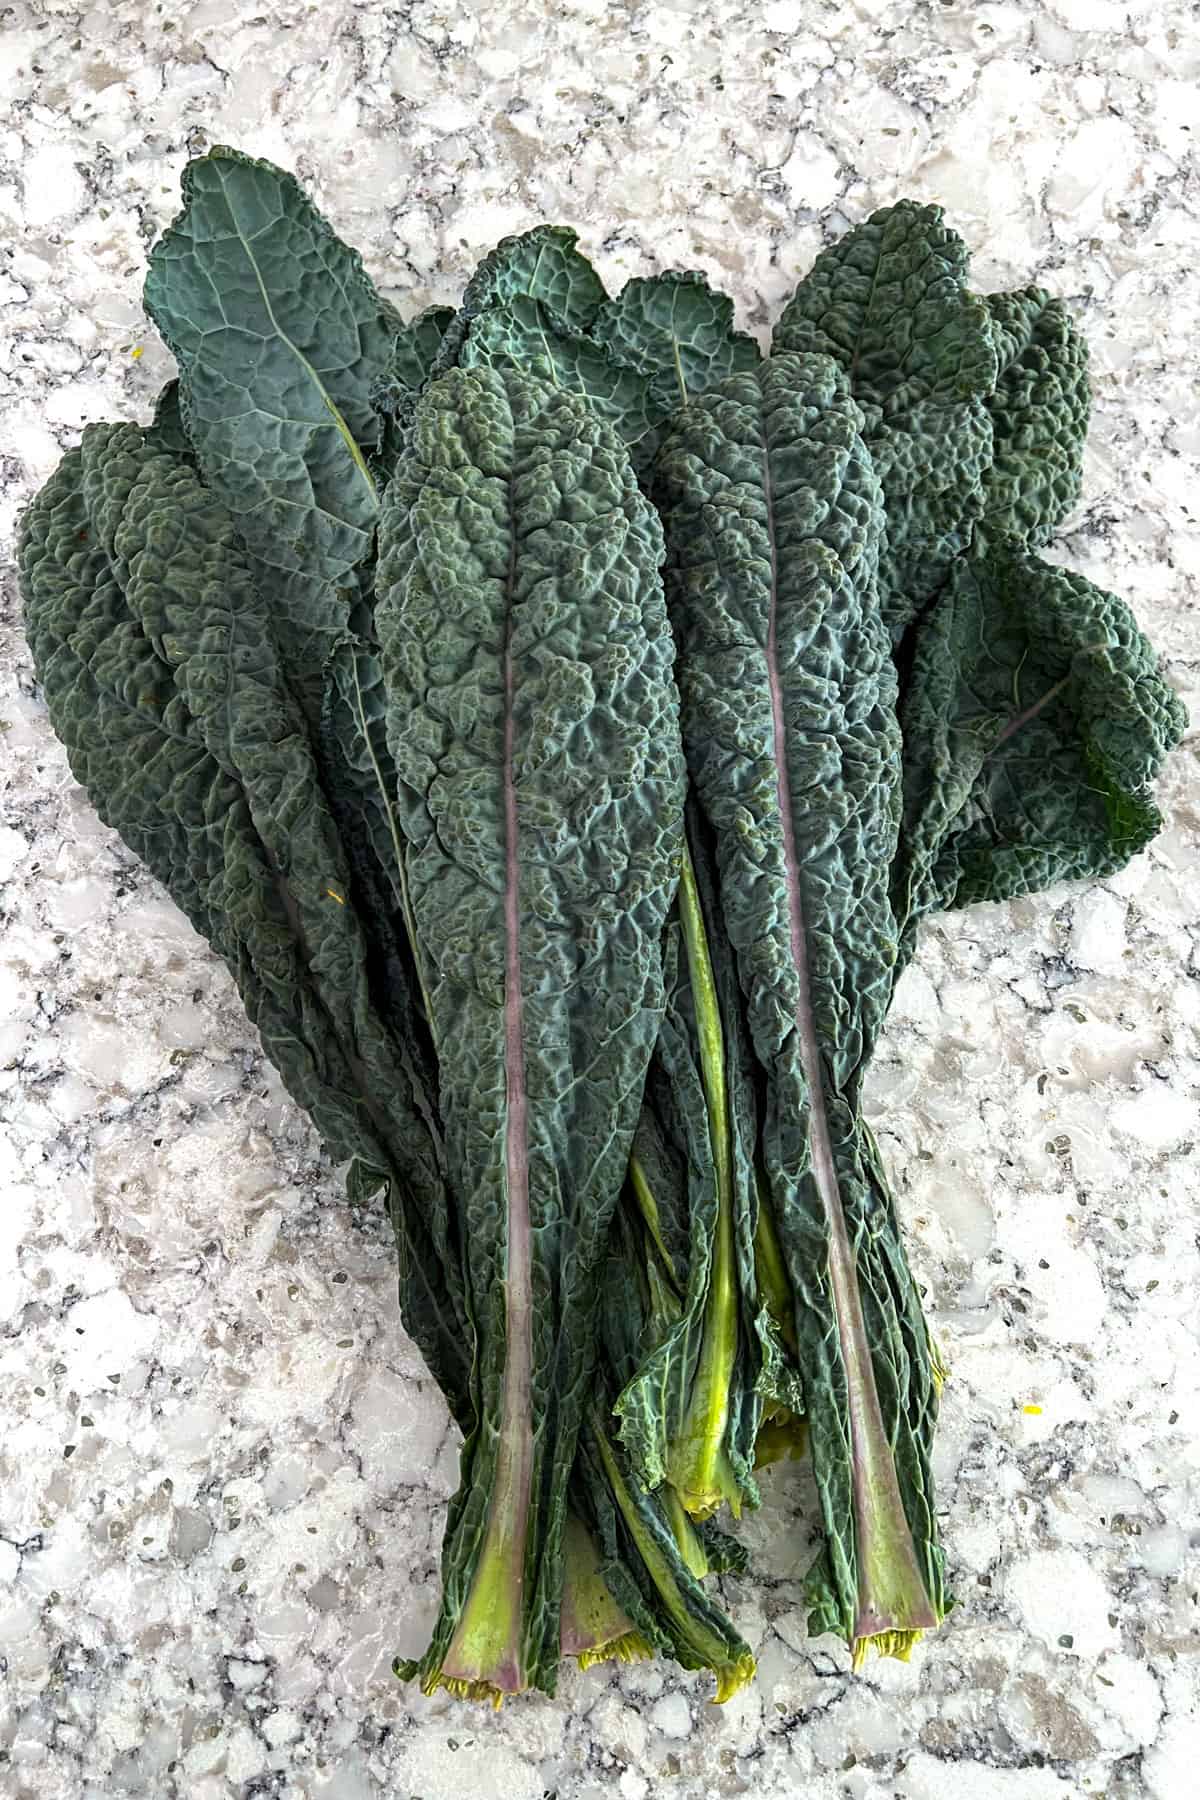 bunch of tuscan kale on a granite countertop